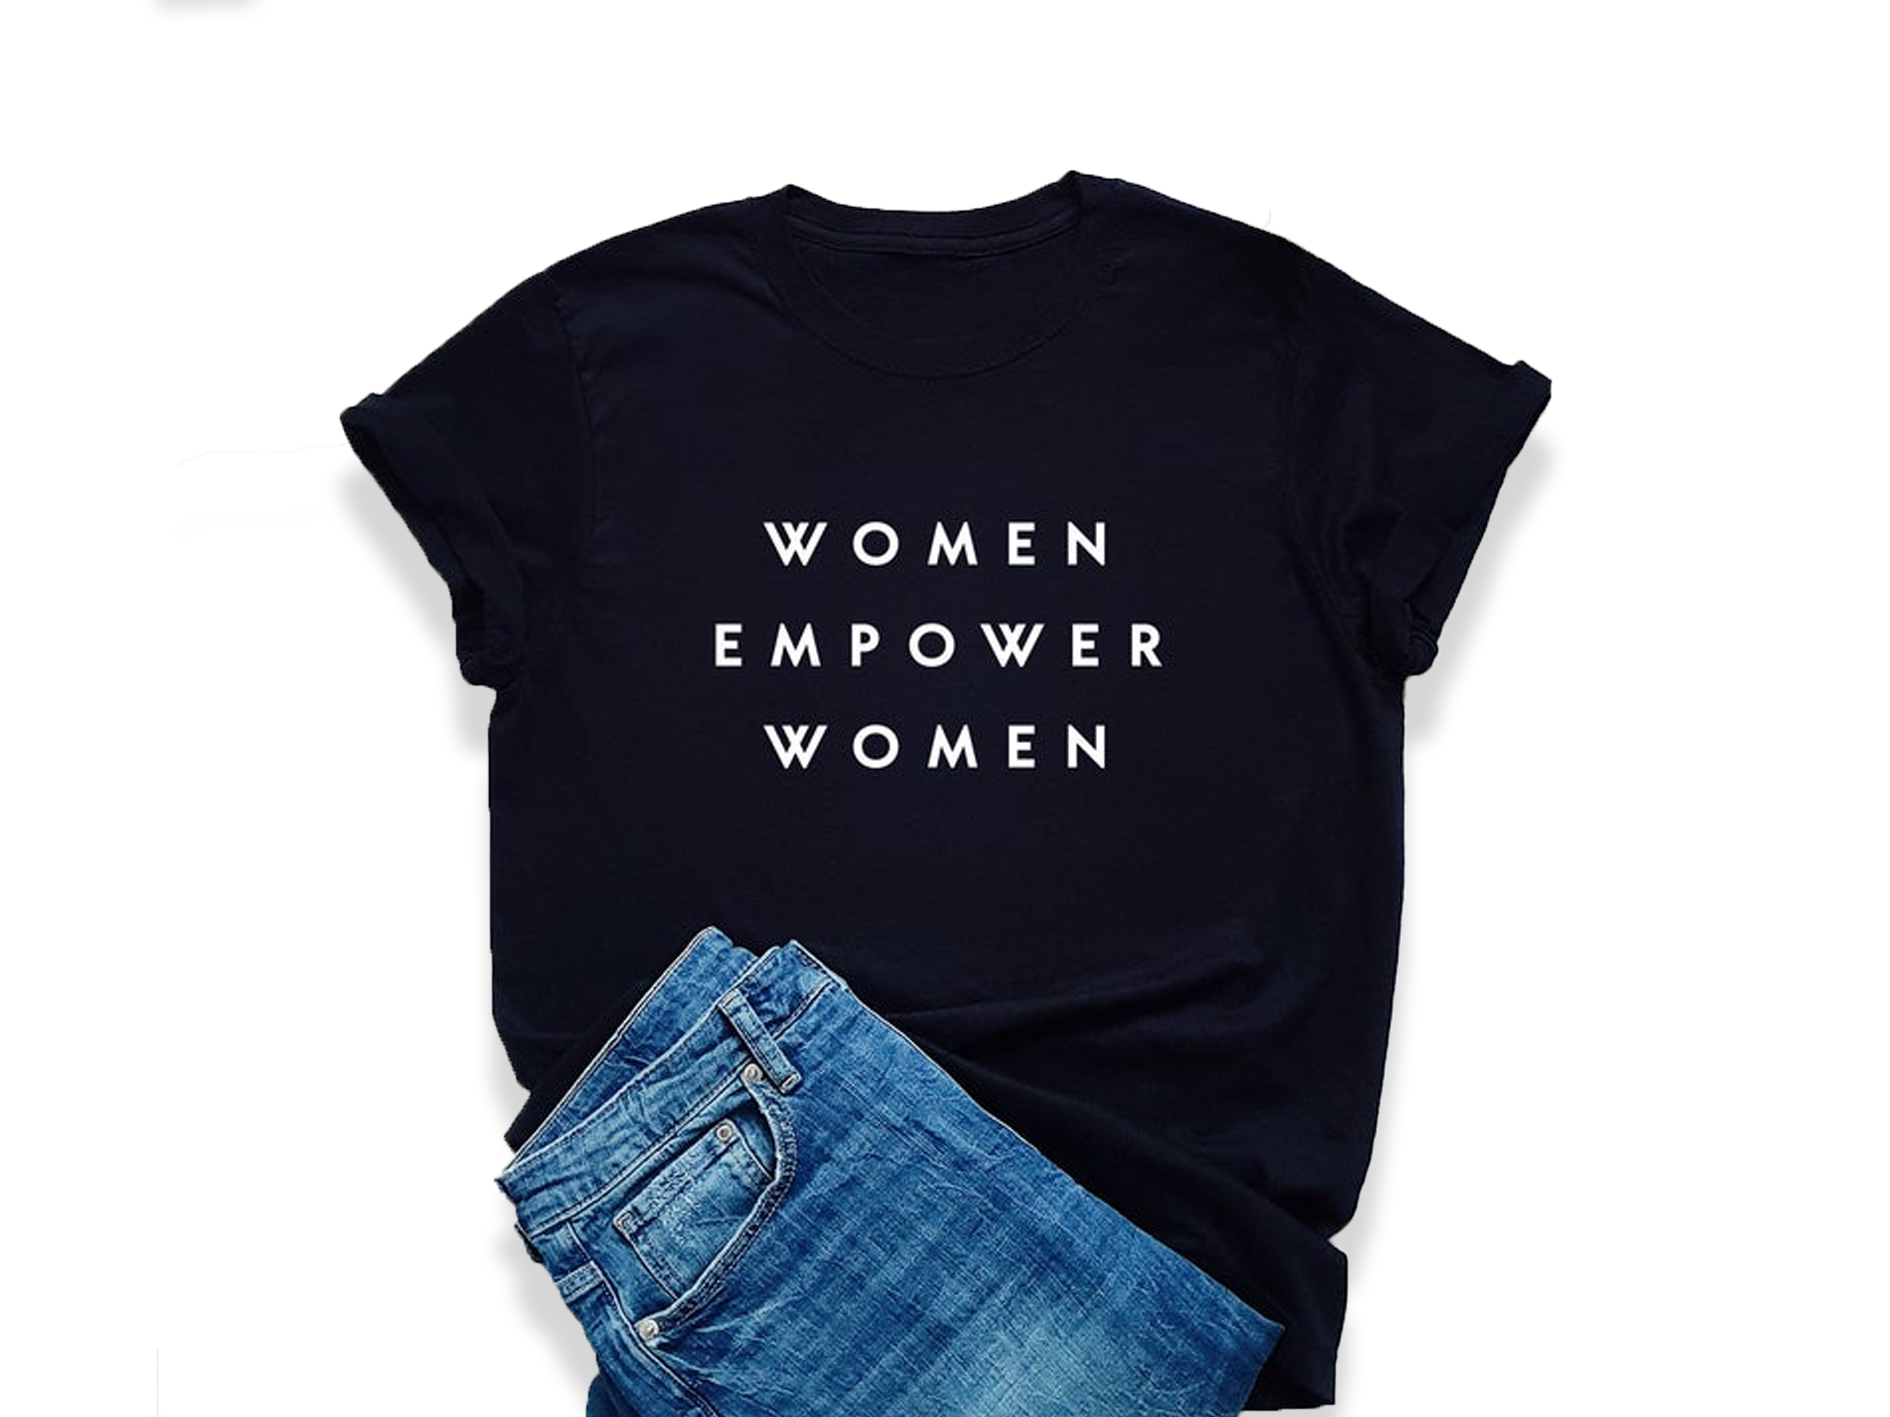 12 Slogan T-Shirts for Women's Day 2020